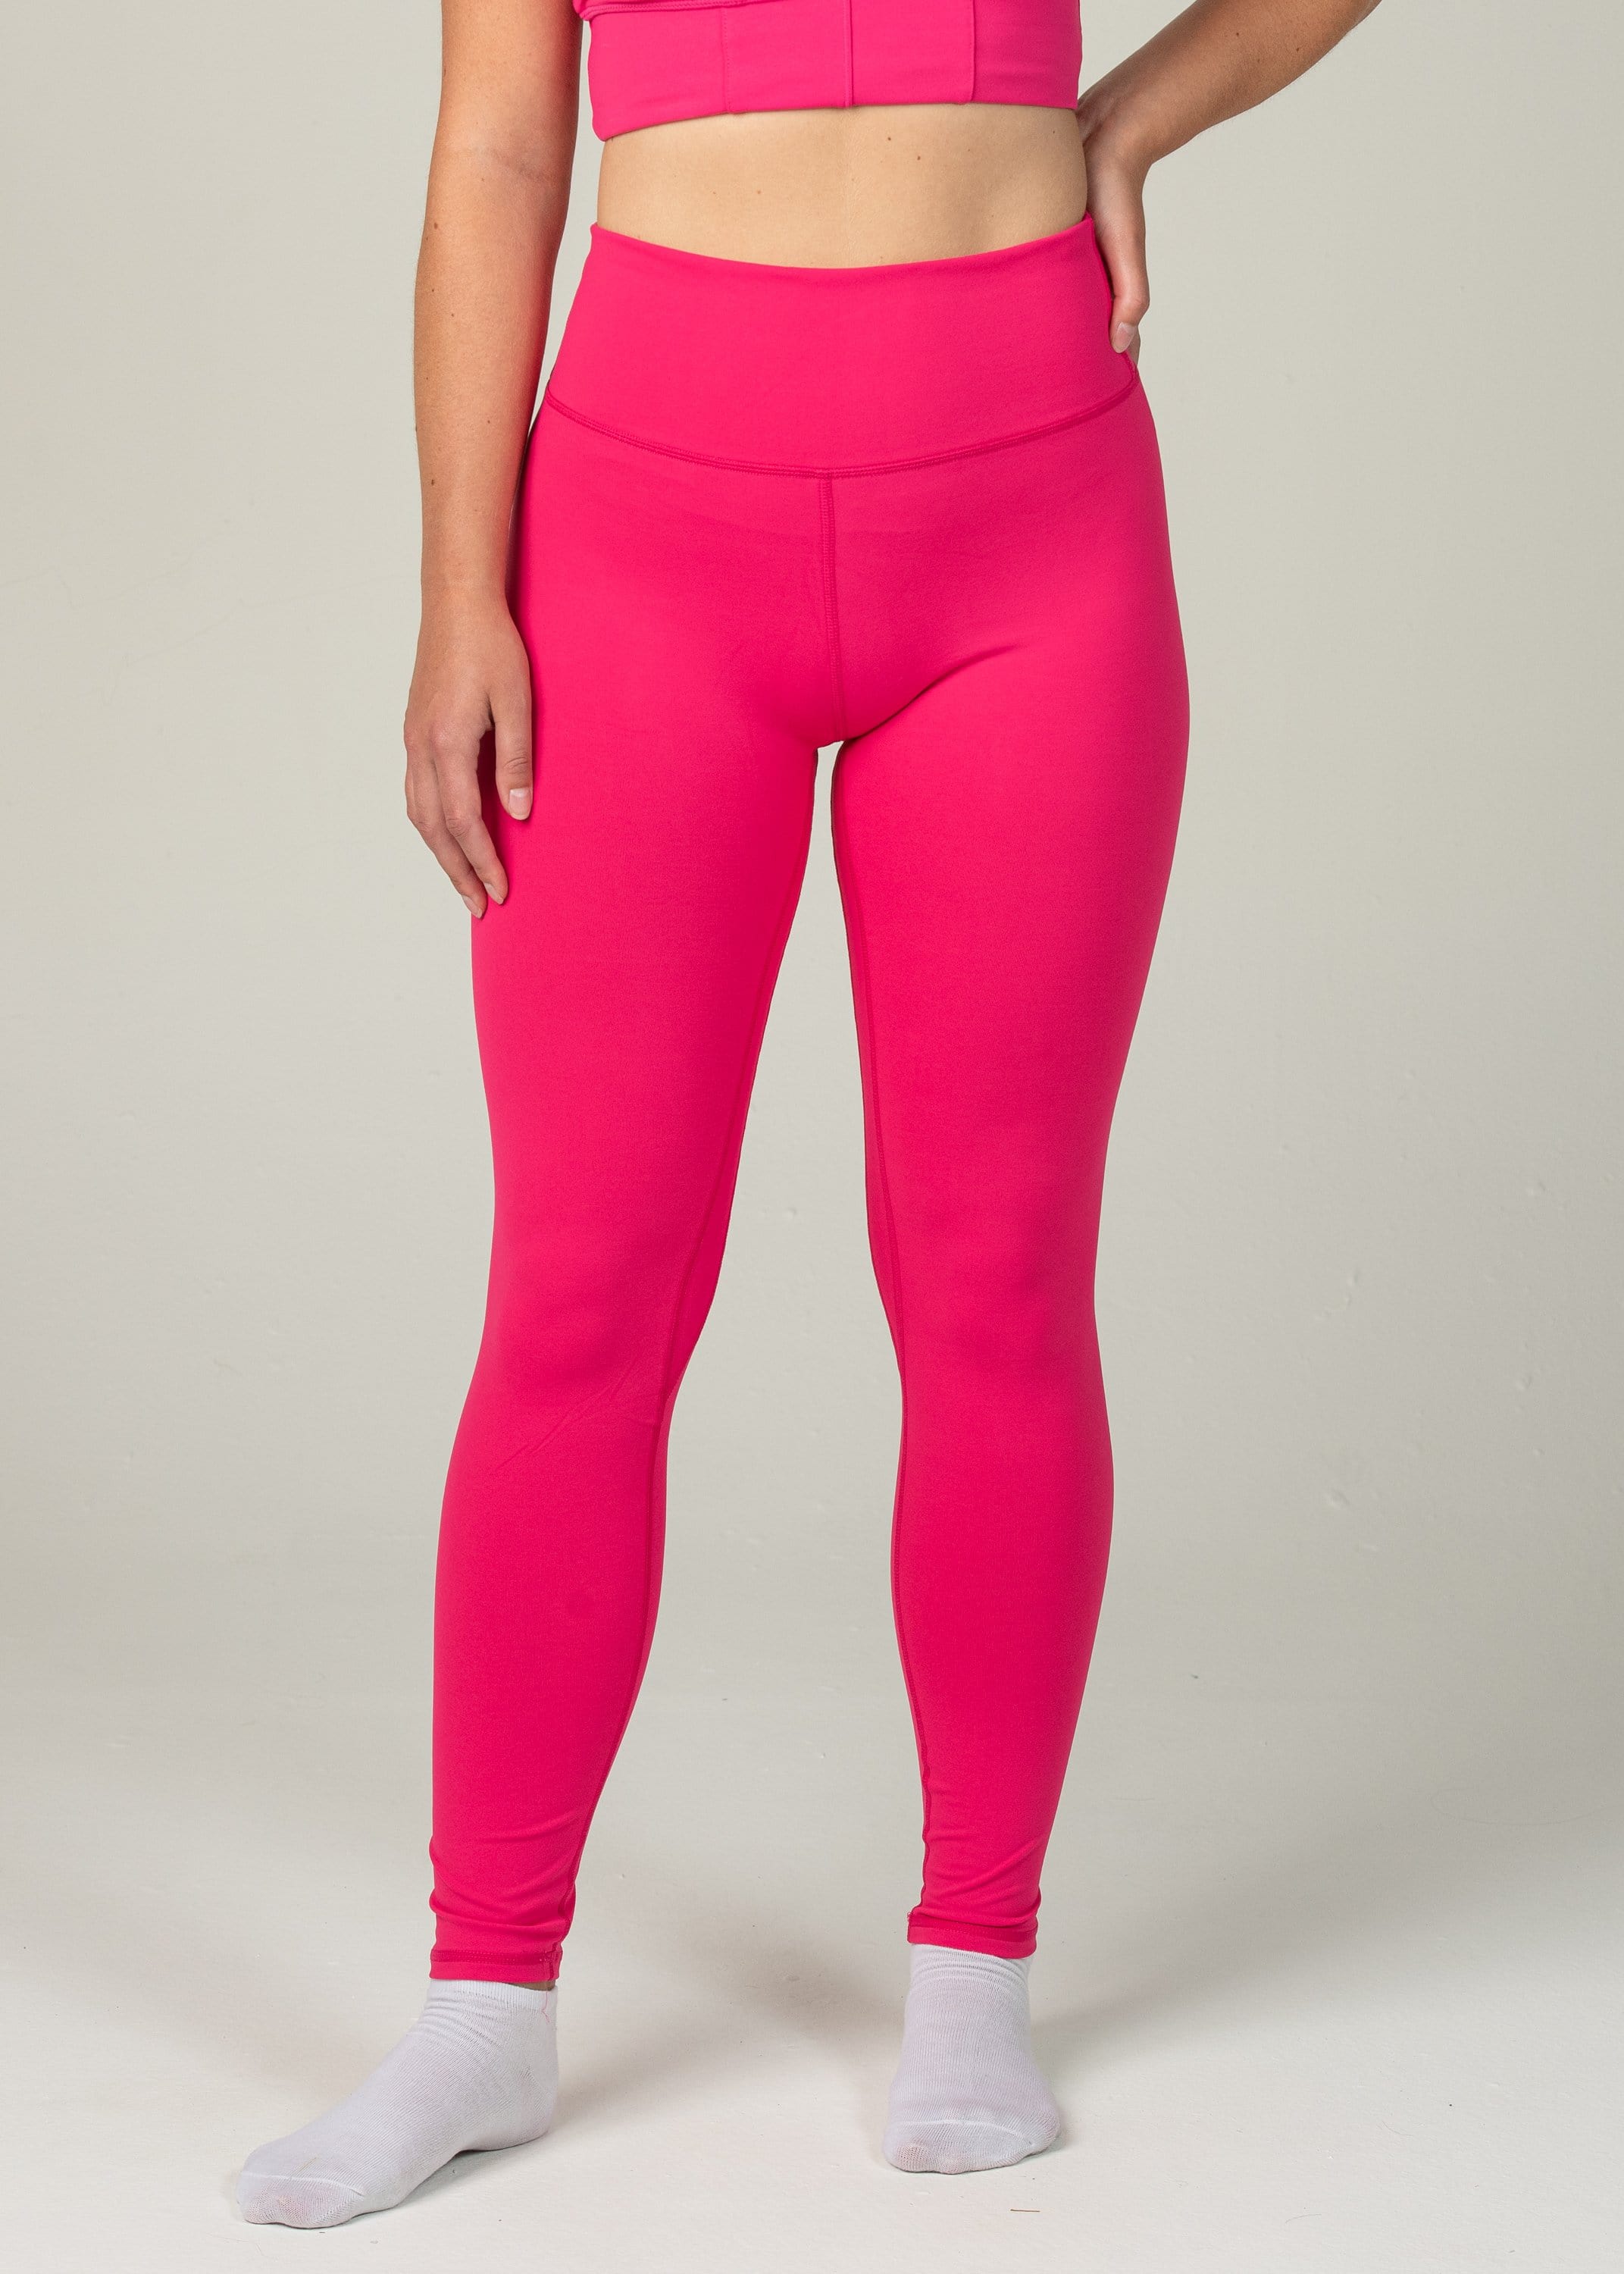 NWT Juicy Couture Sport ESSENTIAL CROP in PINK POW color Athletic Leggings  XL 